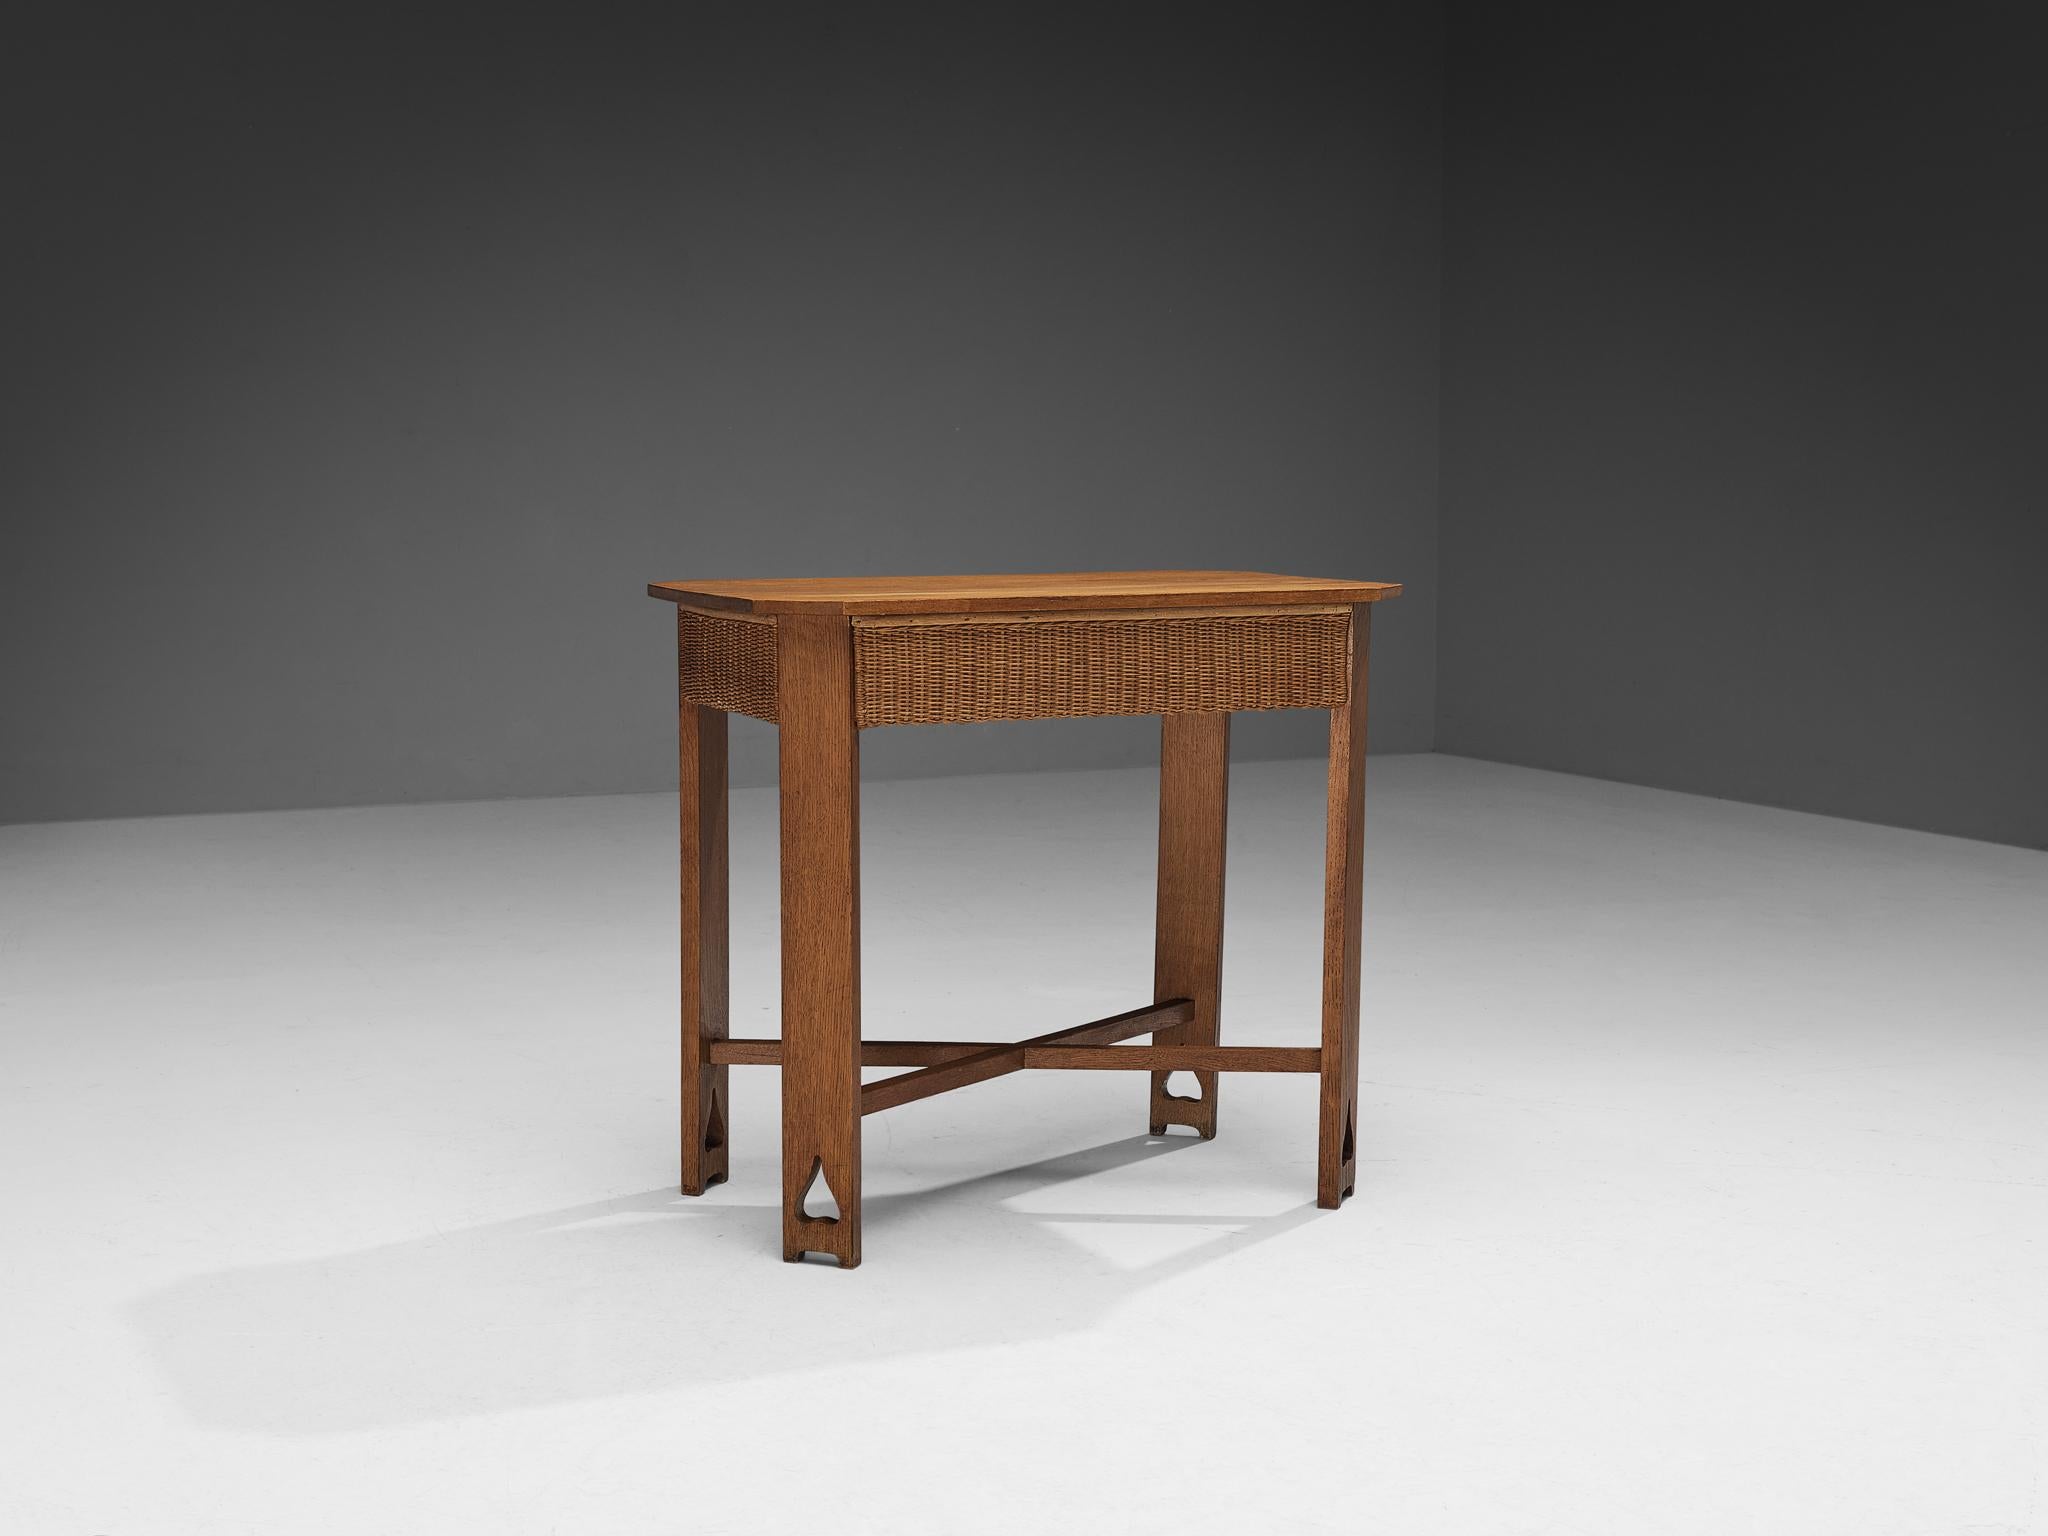 Table, oak, cane, Austria, 1920s

This eloquent table or small desk is designed during the Arts & Crafts period in Germany/Austria approximately around the twenties and designed by an experienced craftsmen whose identity is unfortunately not yet